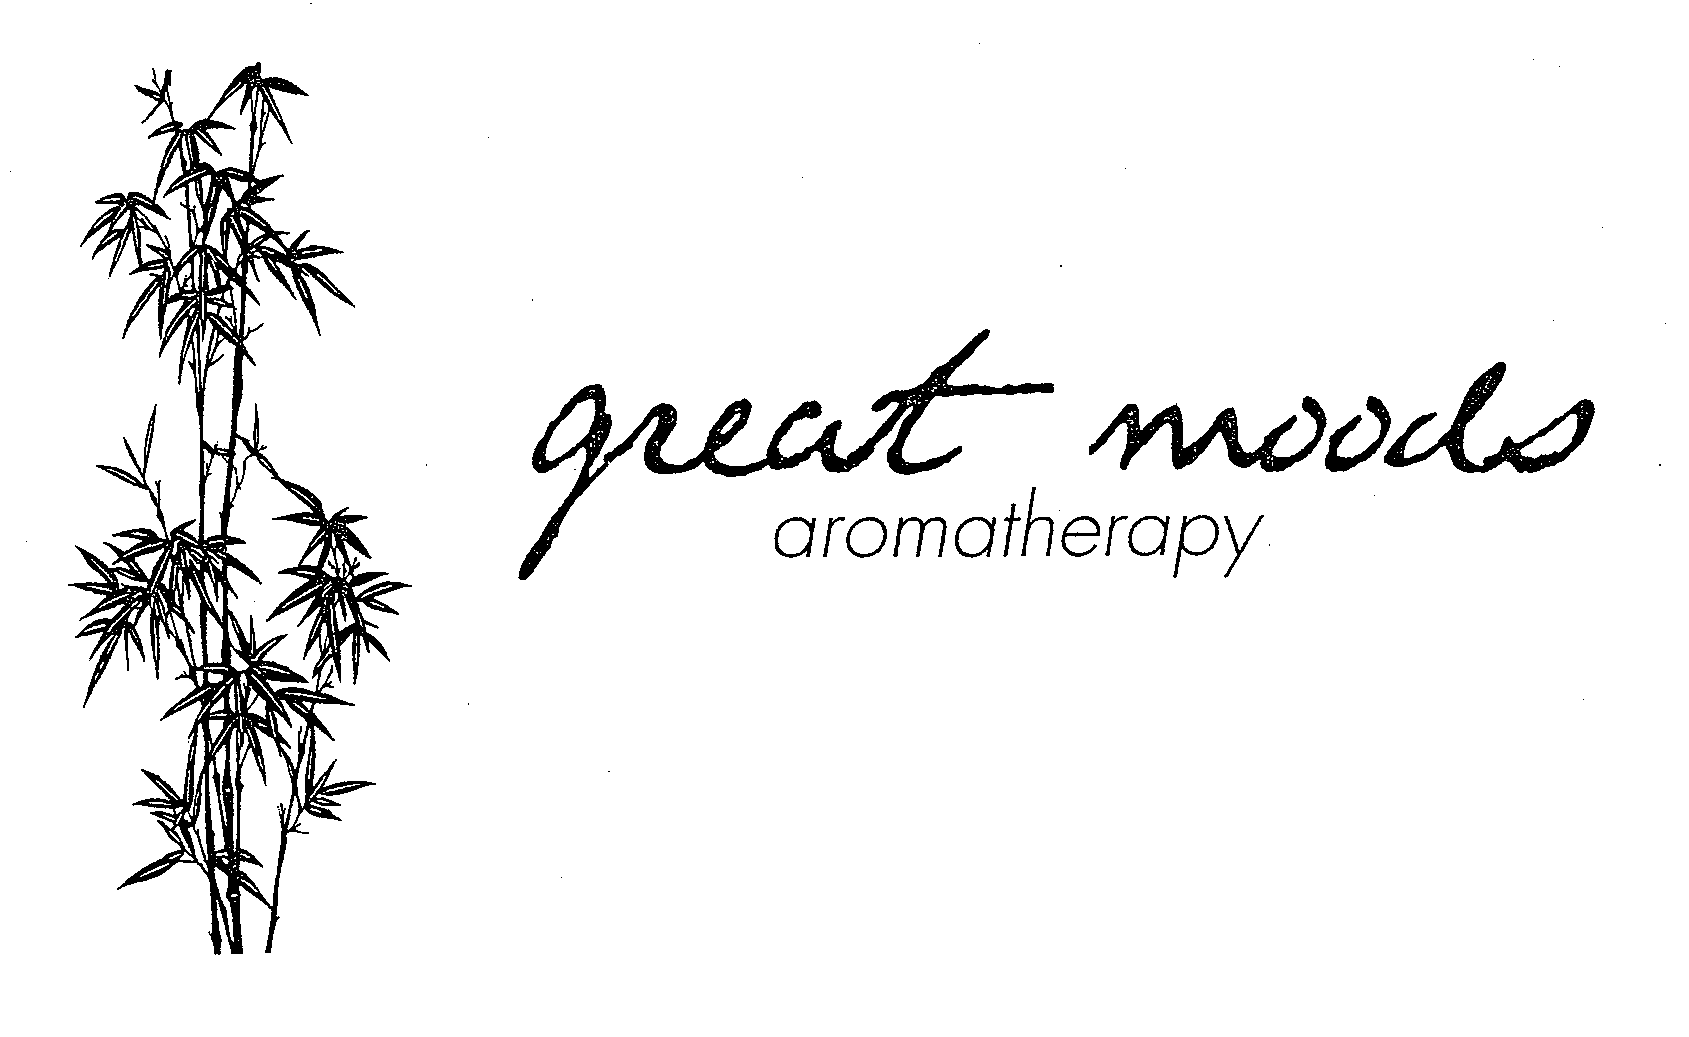 GREAT MOODS AROMATHERAPY